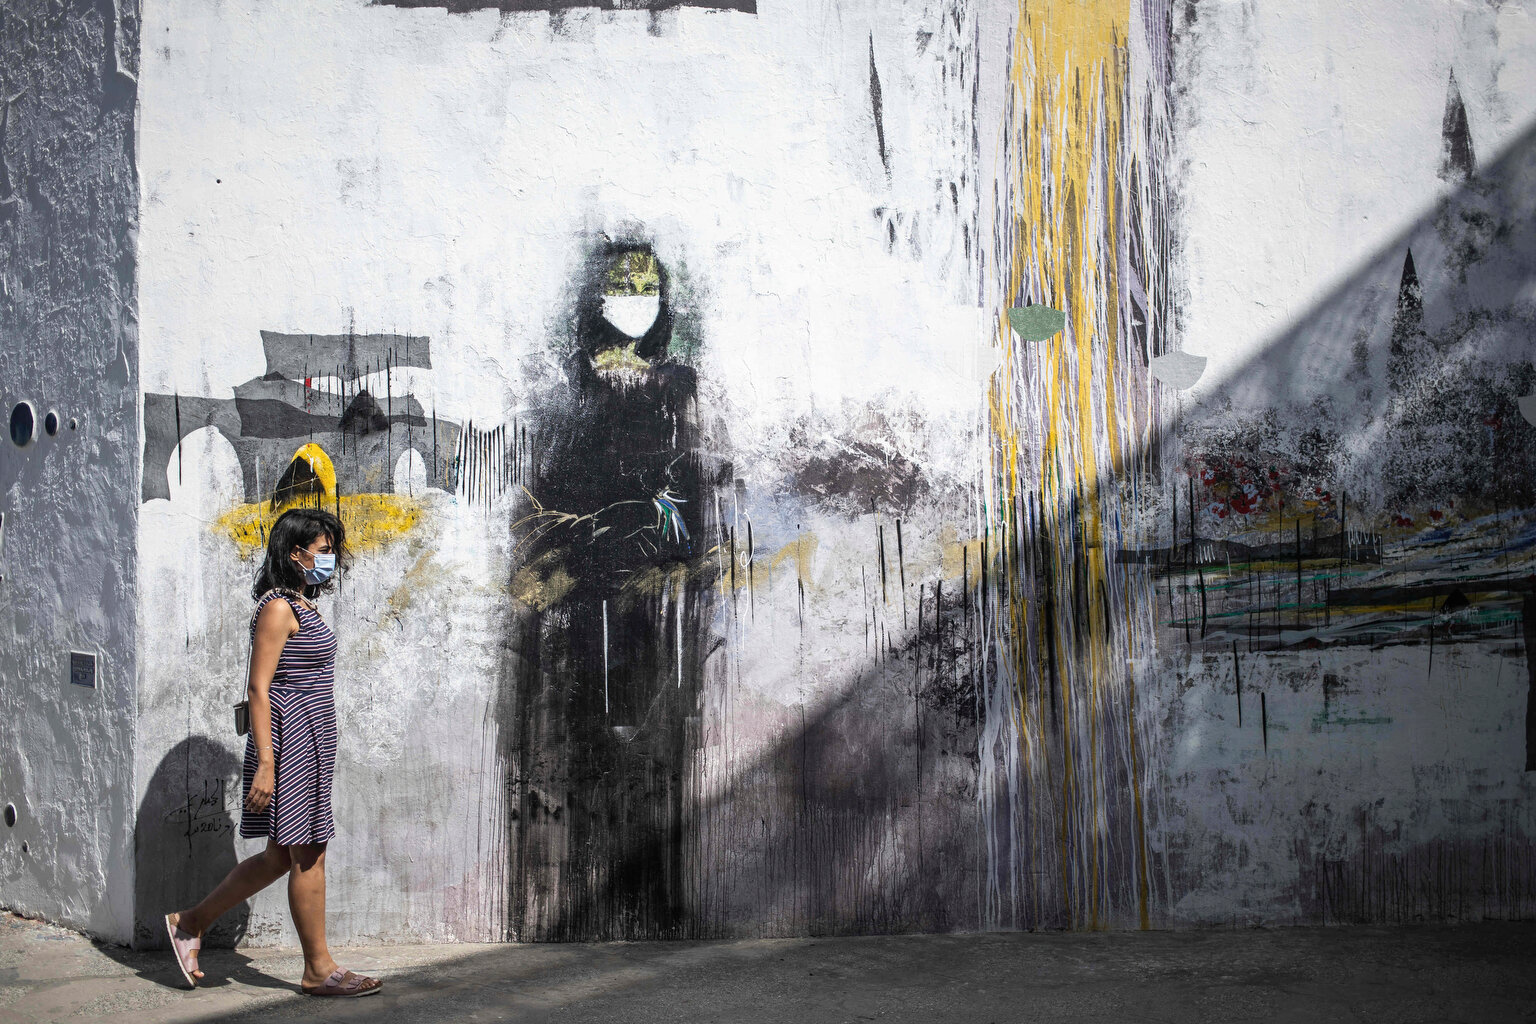  A woman wearing a face mask to prevent the spread of coronavirus walks past a mural of a mask-wearing Mona Lisa, in the Medina of Asilah, northern Morocco, Saturday, Sept. 19, 2020. The town is known for its well-preserved ramparts which were built 